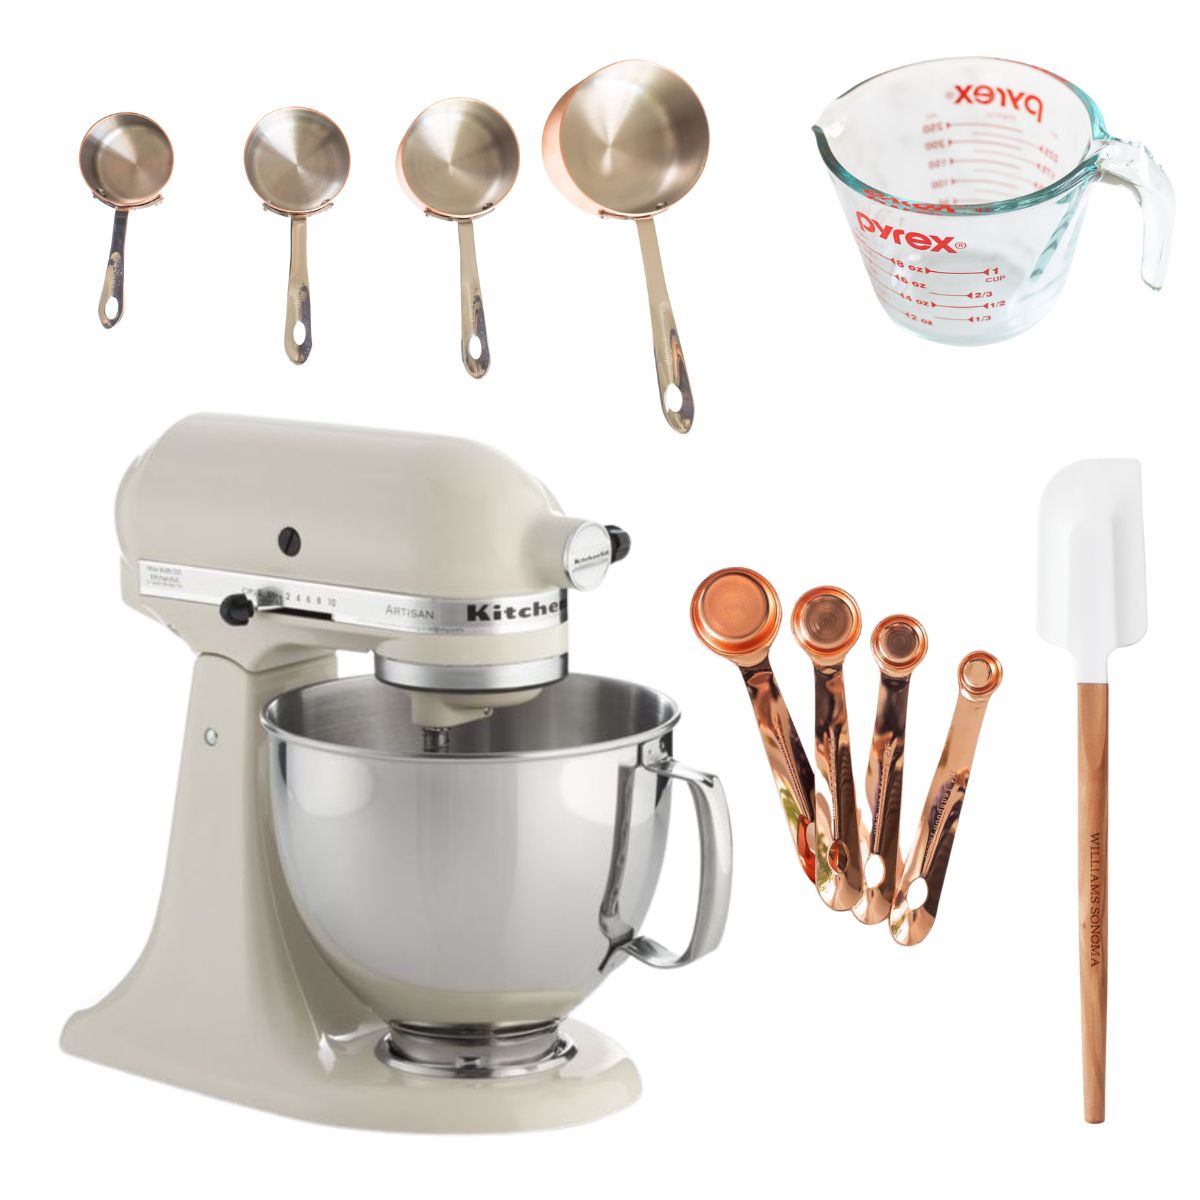 A KitchenAid mixer and measuring spoons are essential tools for preparing delicious sweet dips, such as peppermint dip or fruit dip. Along with other kitchen utensils, these items help create mouthwater